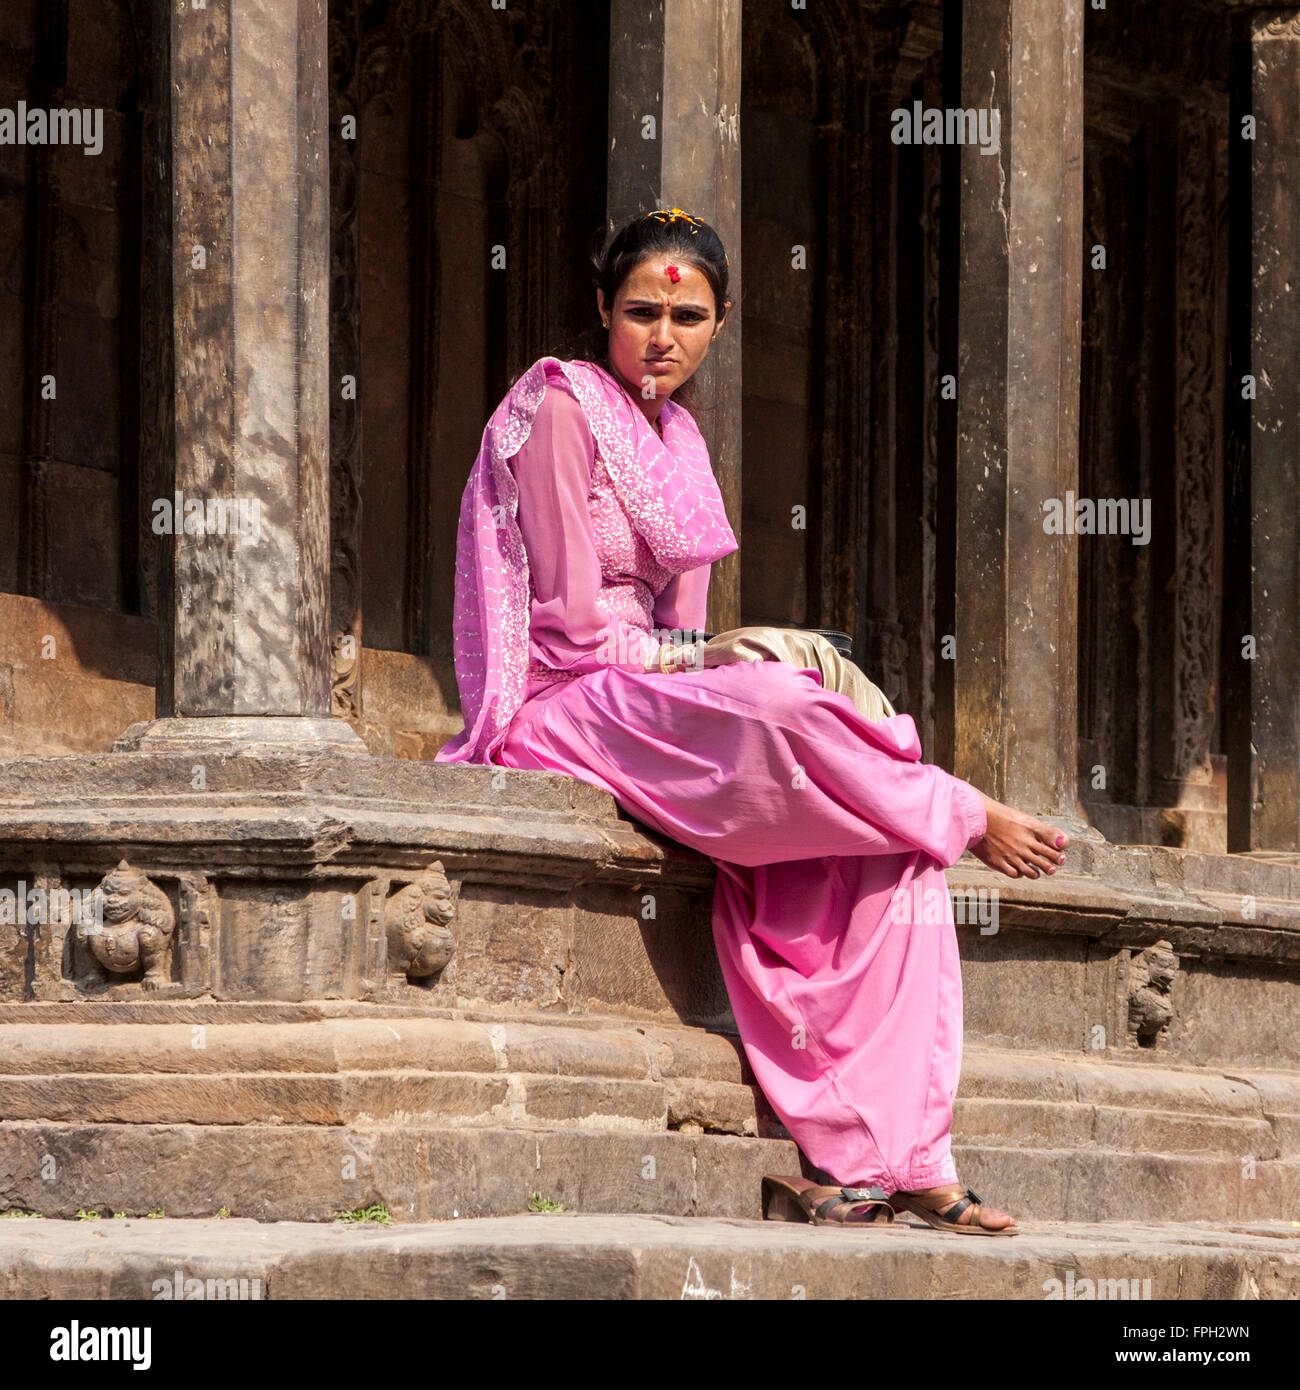 Nepal, Patan.  Nepali Woman with Tika on her Forehead Sitting on Edge of Temple. Stock Photo